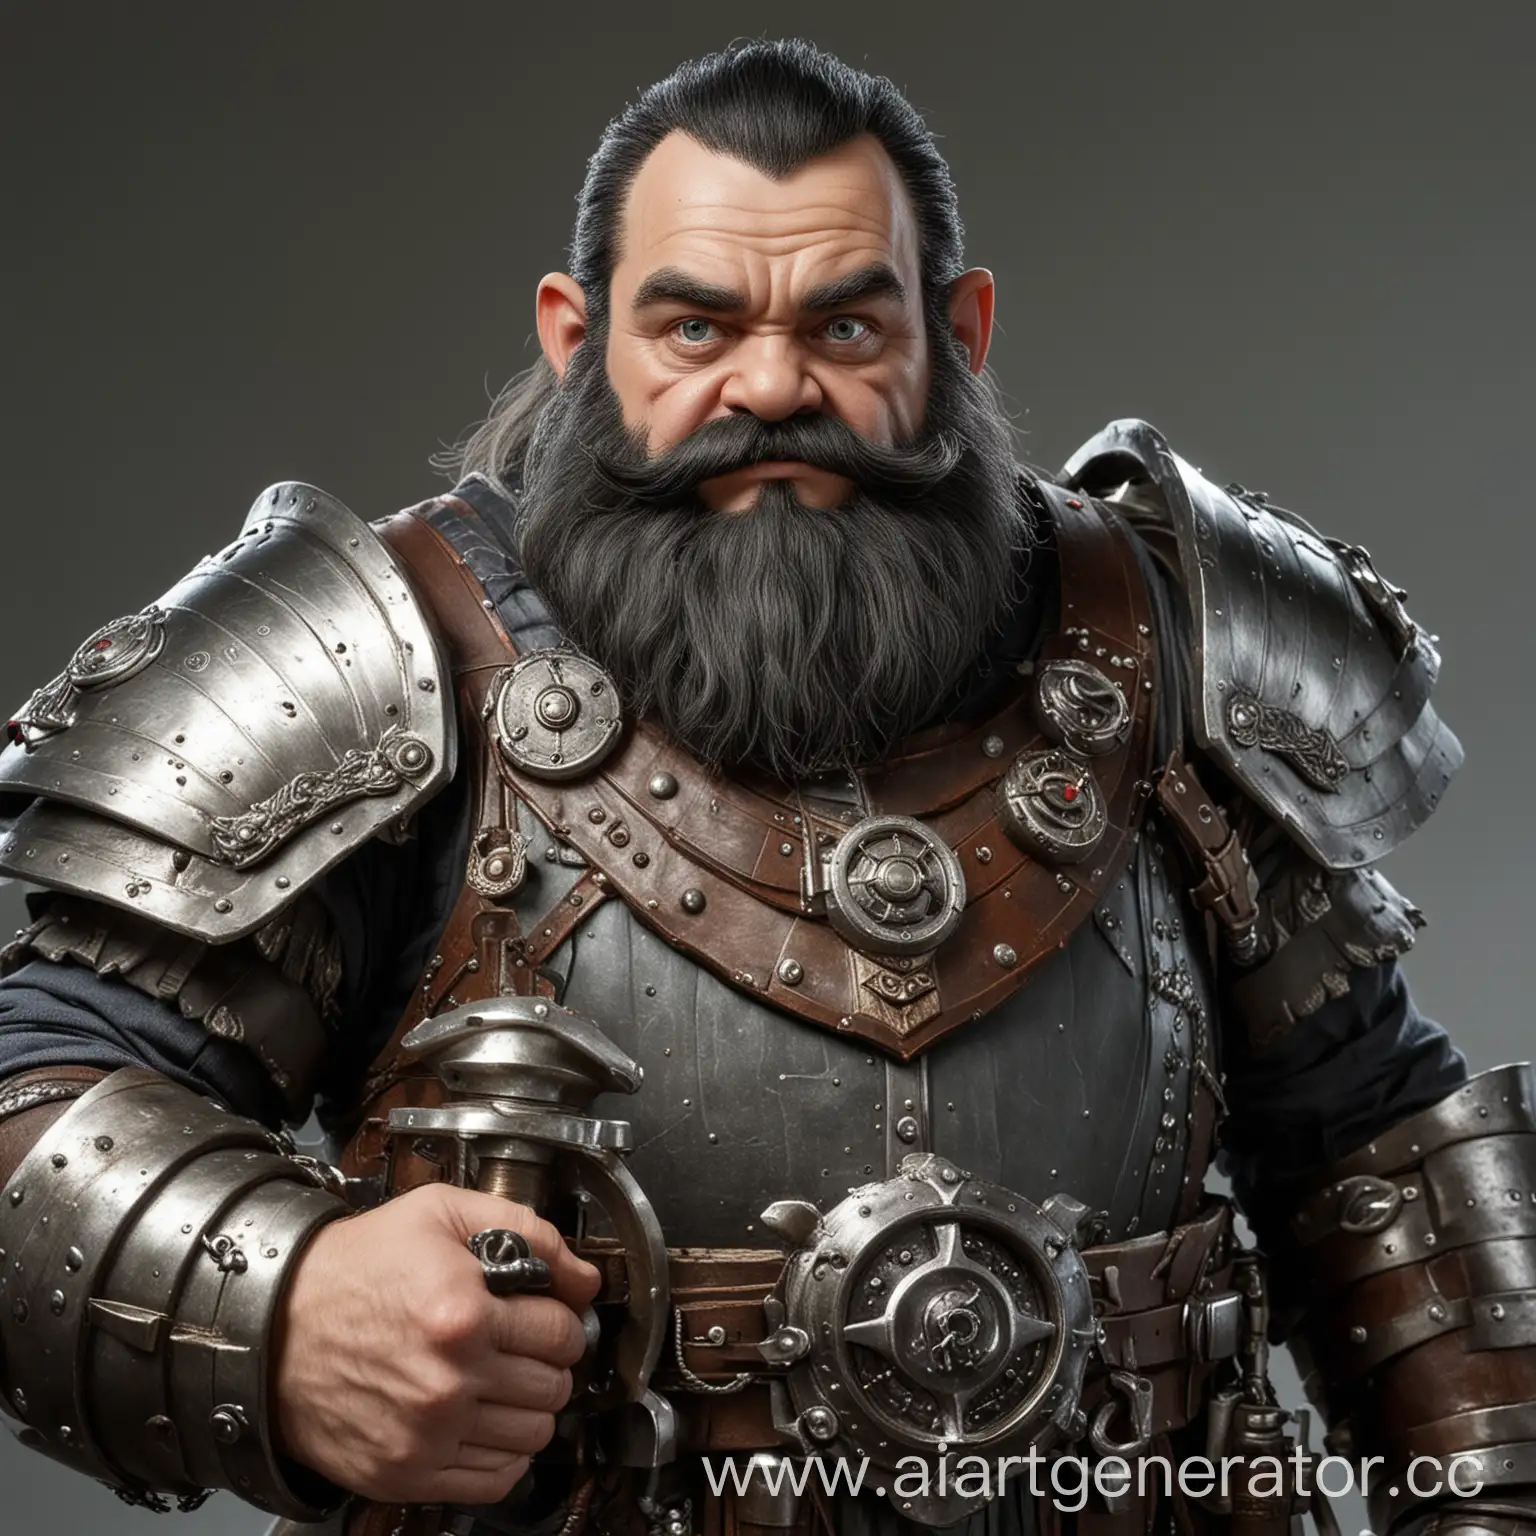 BlackHaired-Dwarf-Engineer-in-Heavy-Metallic-Armor-with-Monocle-Shield-and-Mace